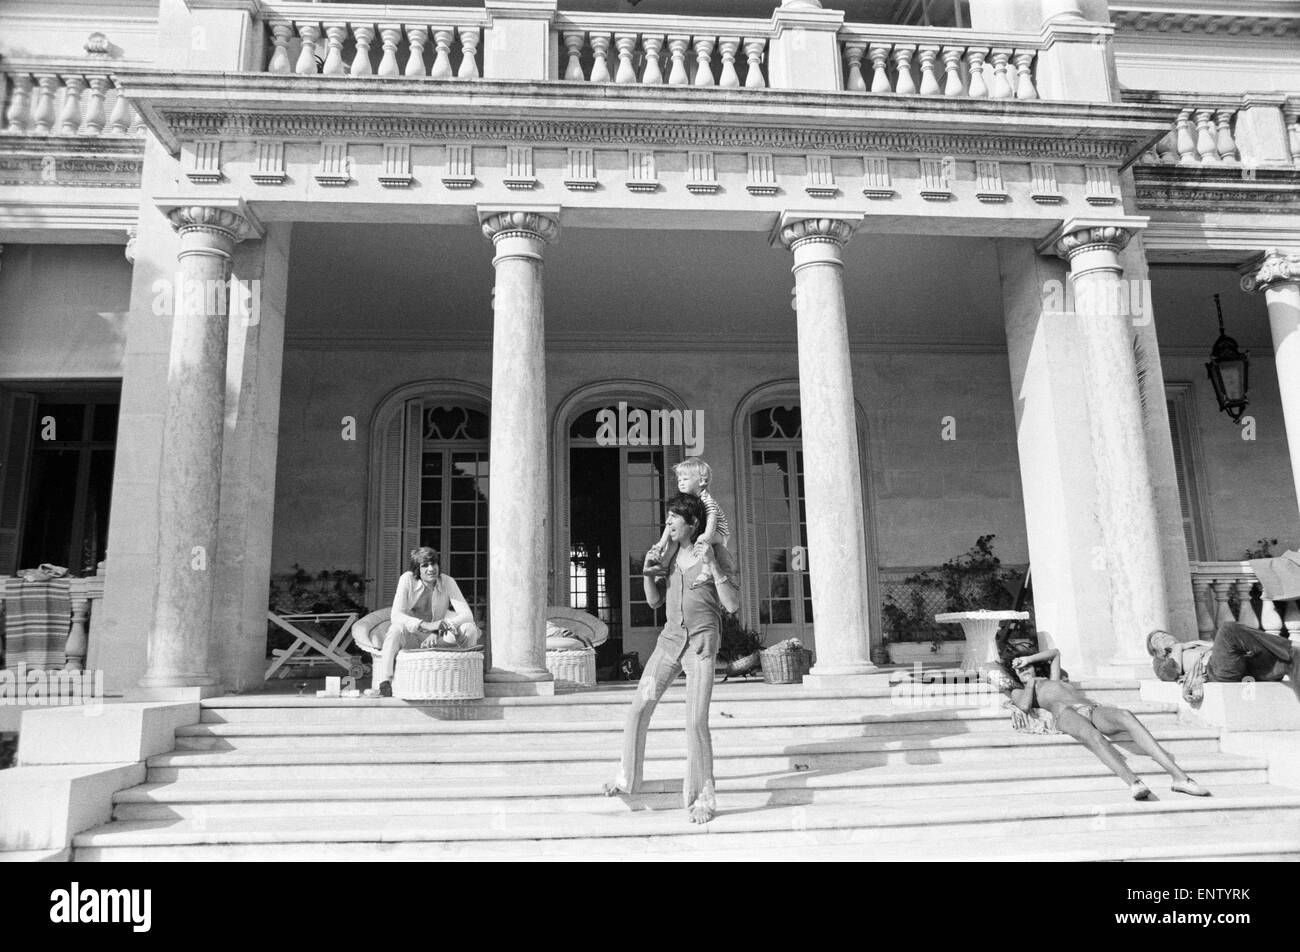 The Rolling Stones in the South of France. 17th May 1971. Keith Richards with his son Marlon at his home Villa Nellcote, a 19th century sixteen room mansion on the waterfront in Villefranche-sur-Mer. The Stones recorded main parts of Exile On Main St. in the basement of the house. 17th May 1971. Stock Photo